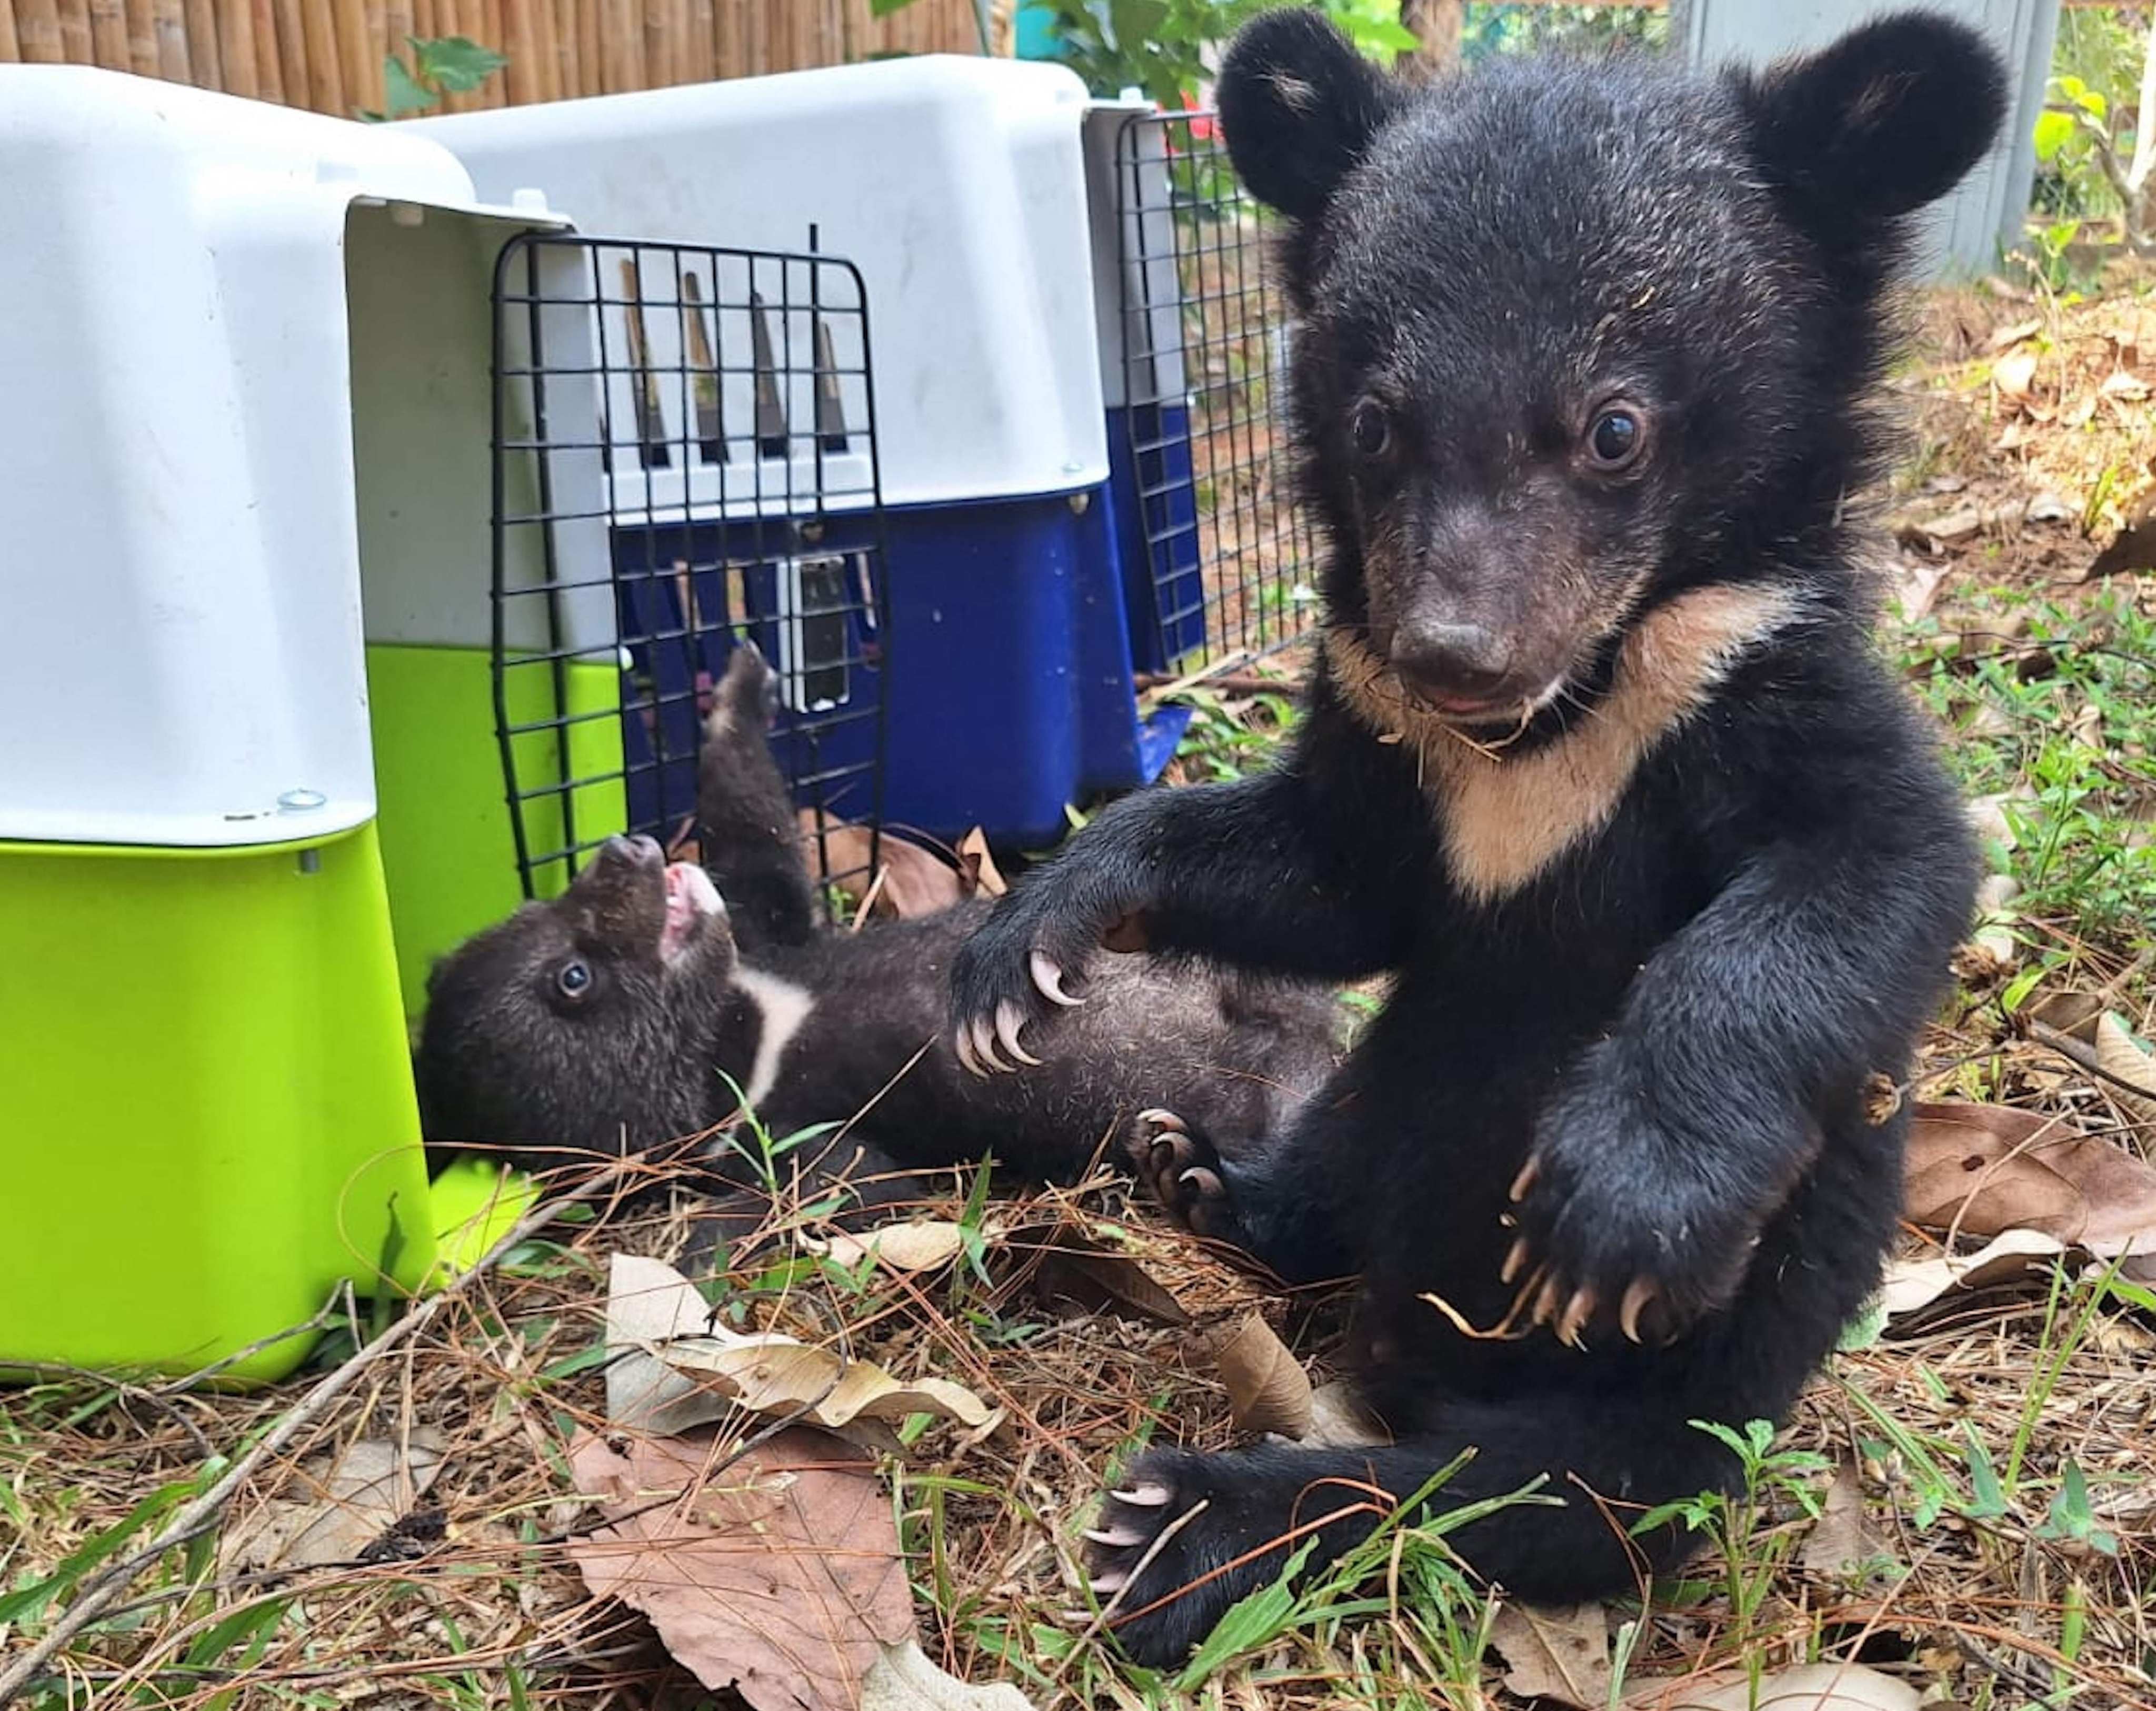 Endangered Asiatic black bear cubs experience touching grass for the first time at Luang Prabang Wildlife Sanctuary after their rescue. Photo: Free the Bears / Handout via AFP